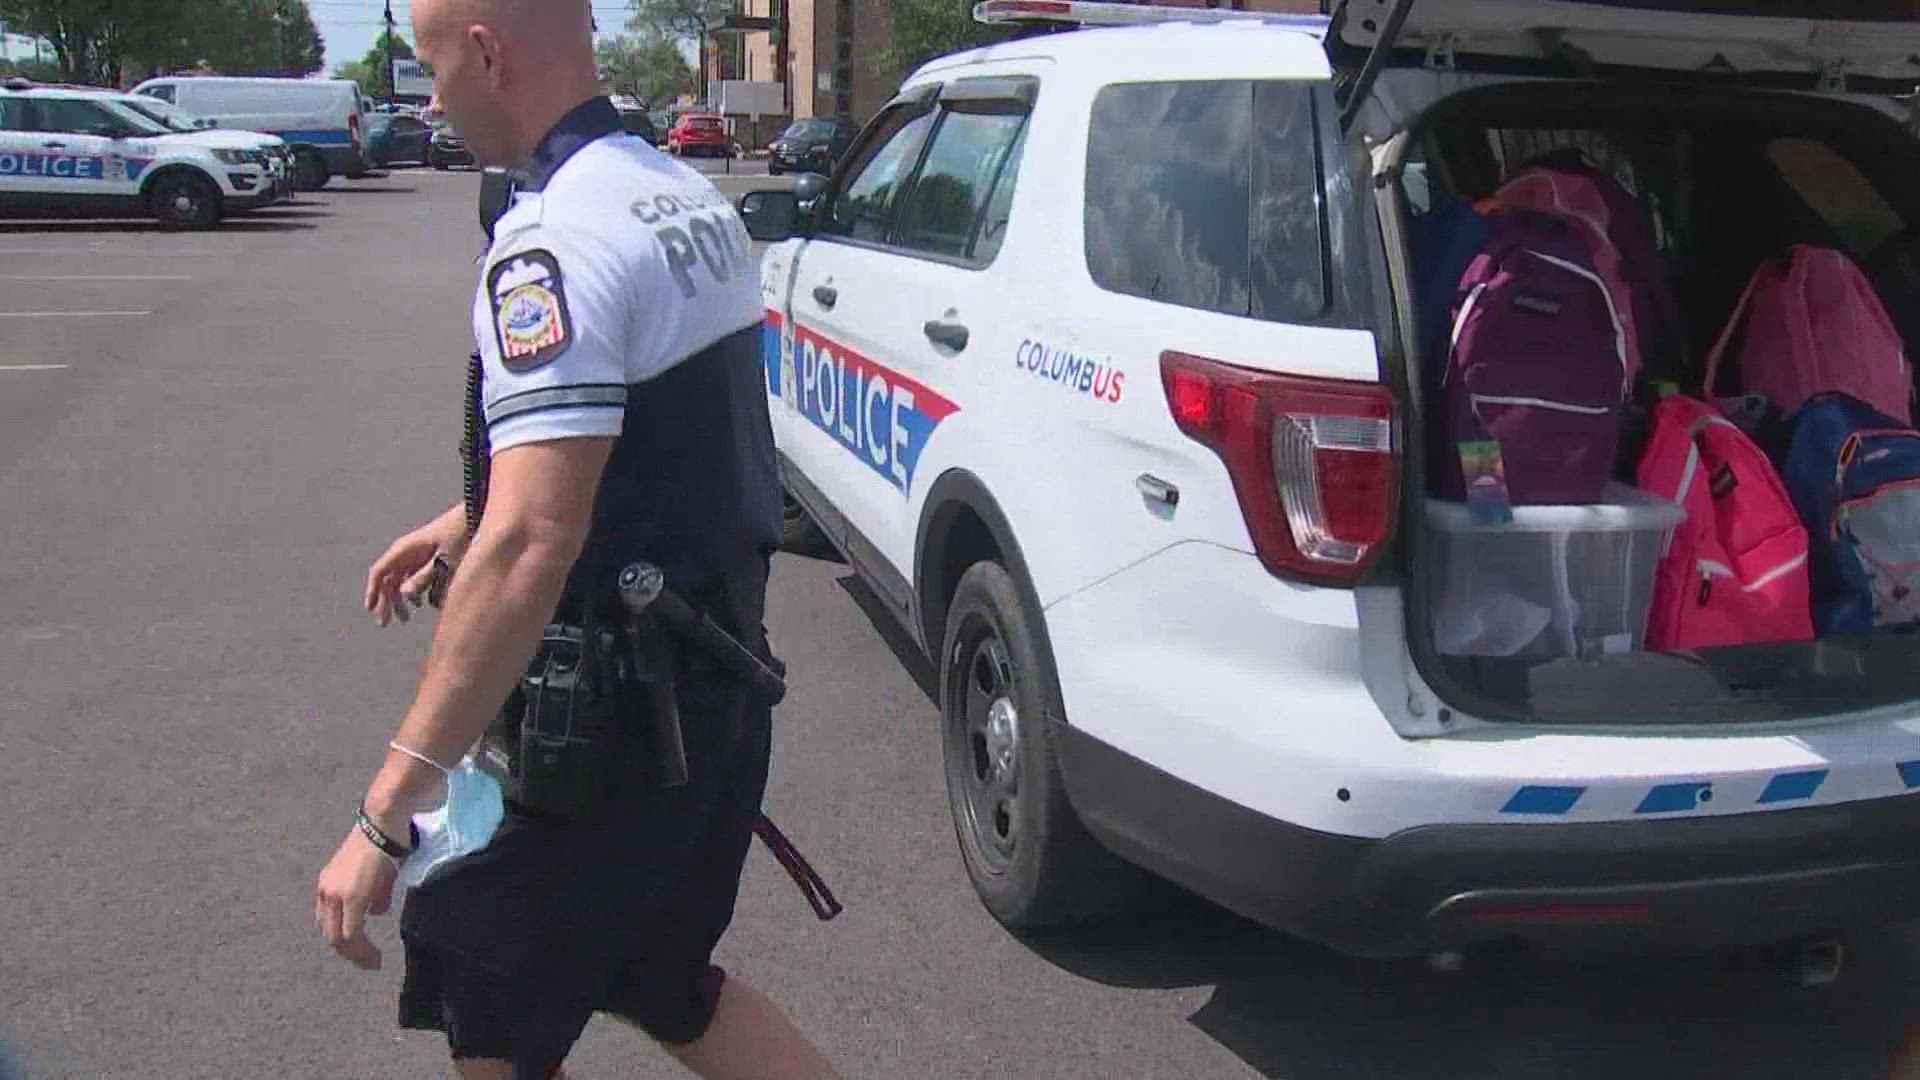 Organizers stuffed more than 50 backpacks, and officers handed them out on the city's north side.